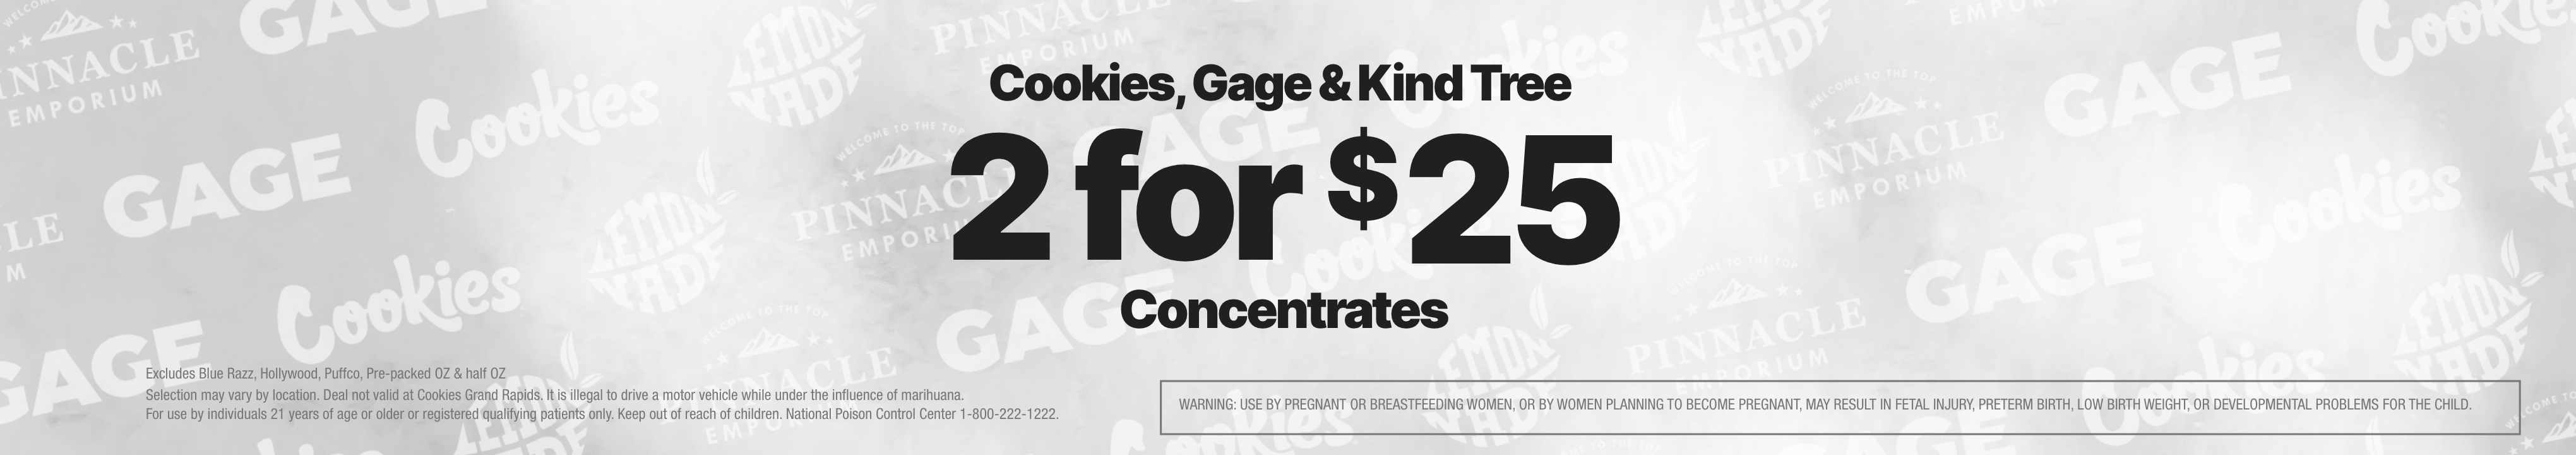 Cannabis Promo, Cannabis Sales, Cannabis Discounts, Cannabis on Sale, GAGE, COOKIES & KIND TREE 1G CONCENTRATES - 2 FOR $25